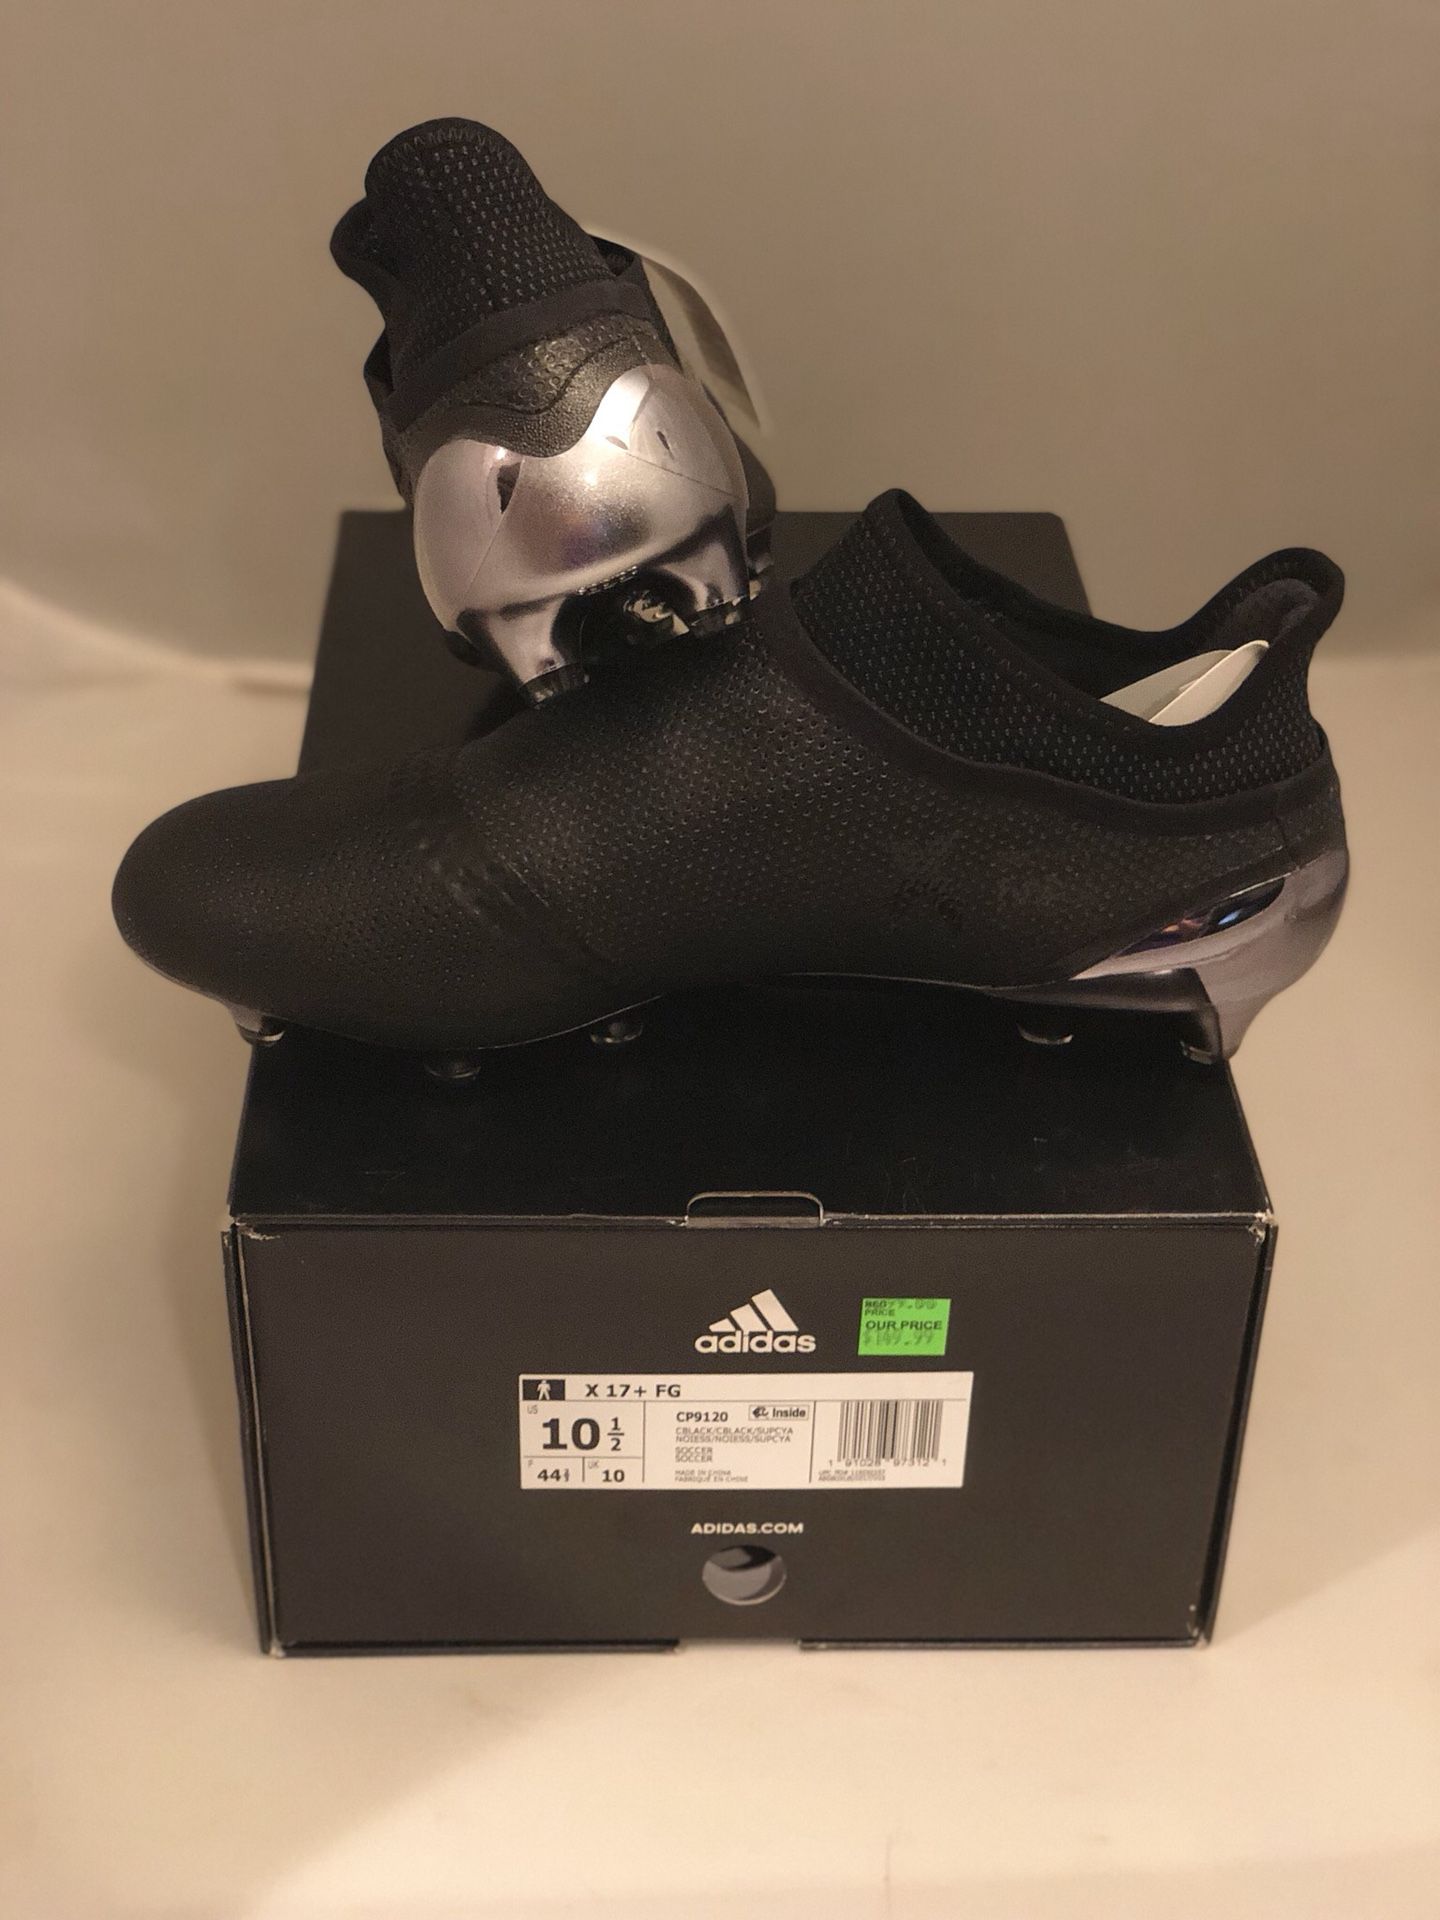 Adidas 17 purespeed night crawler soccer cleats for Sale in Wake Forest, NC - OfferUp